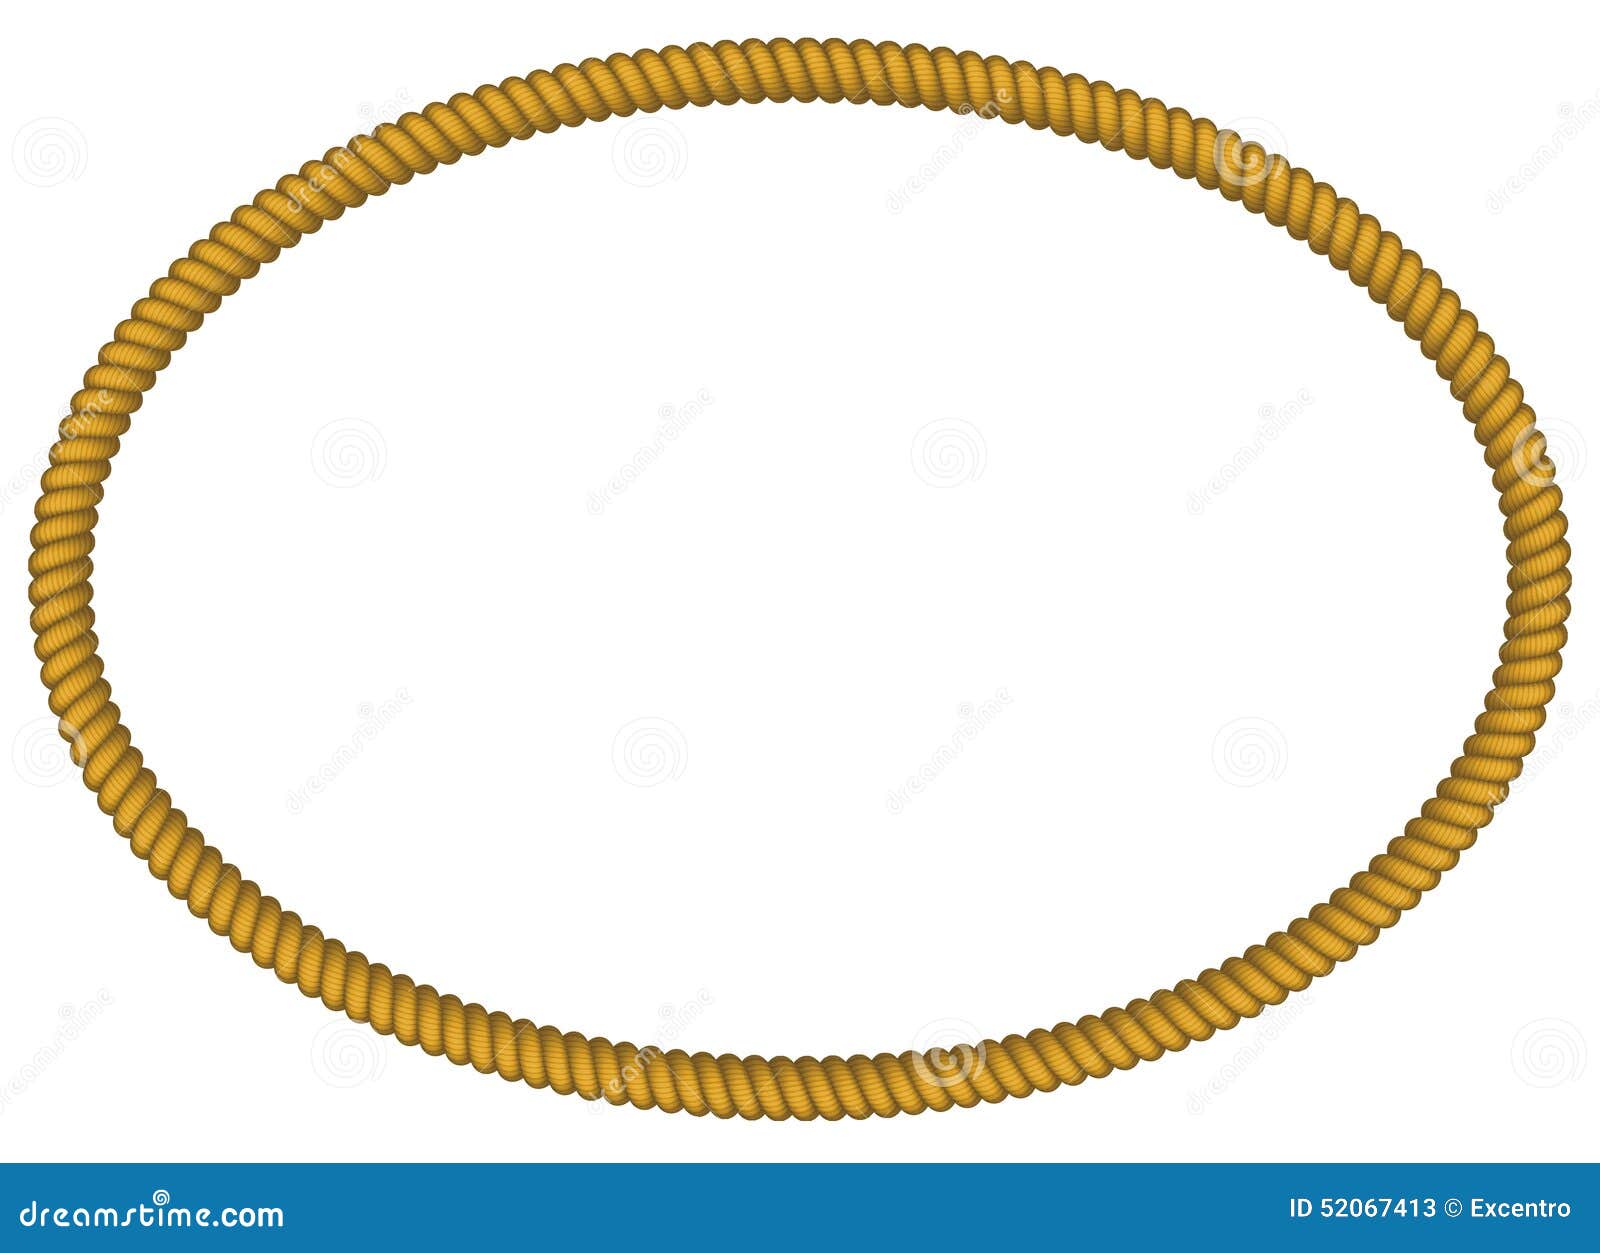 rope clipart vector - photo #29